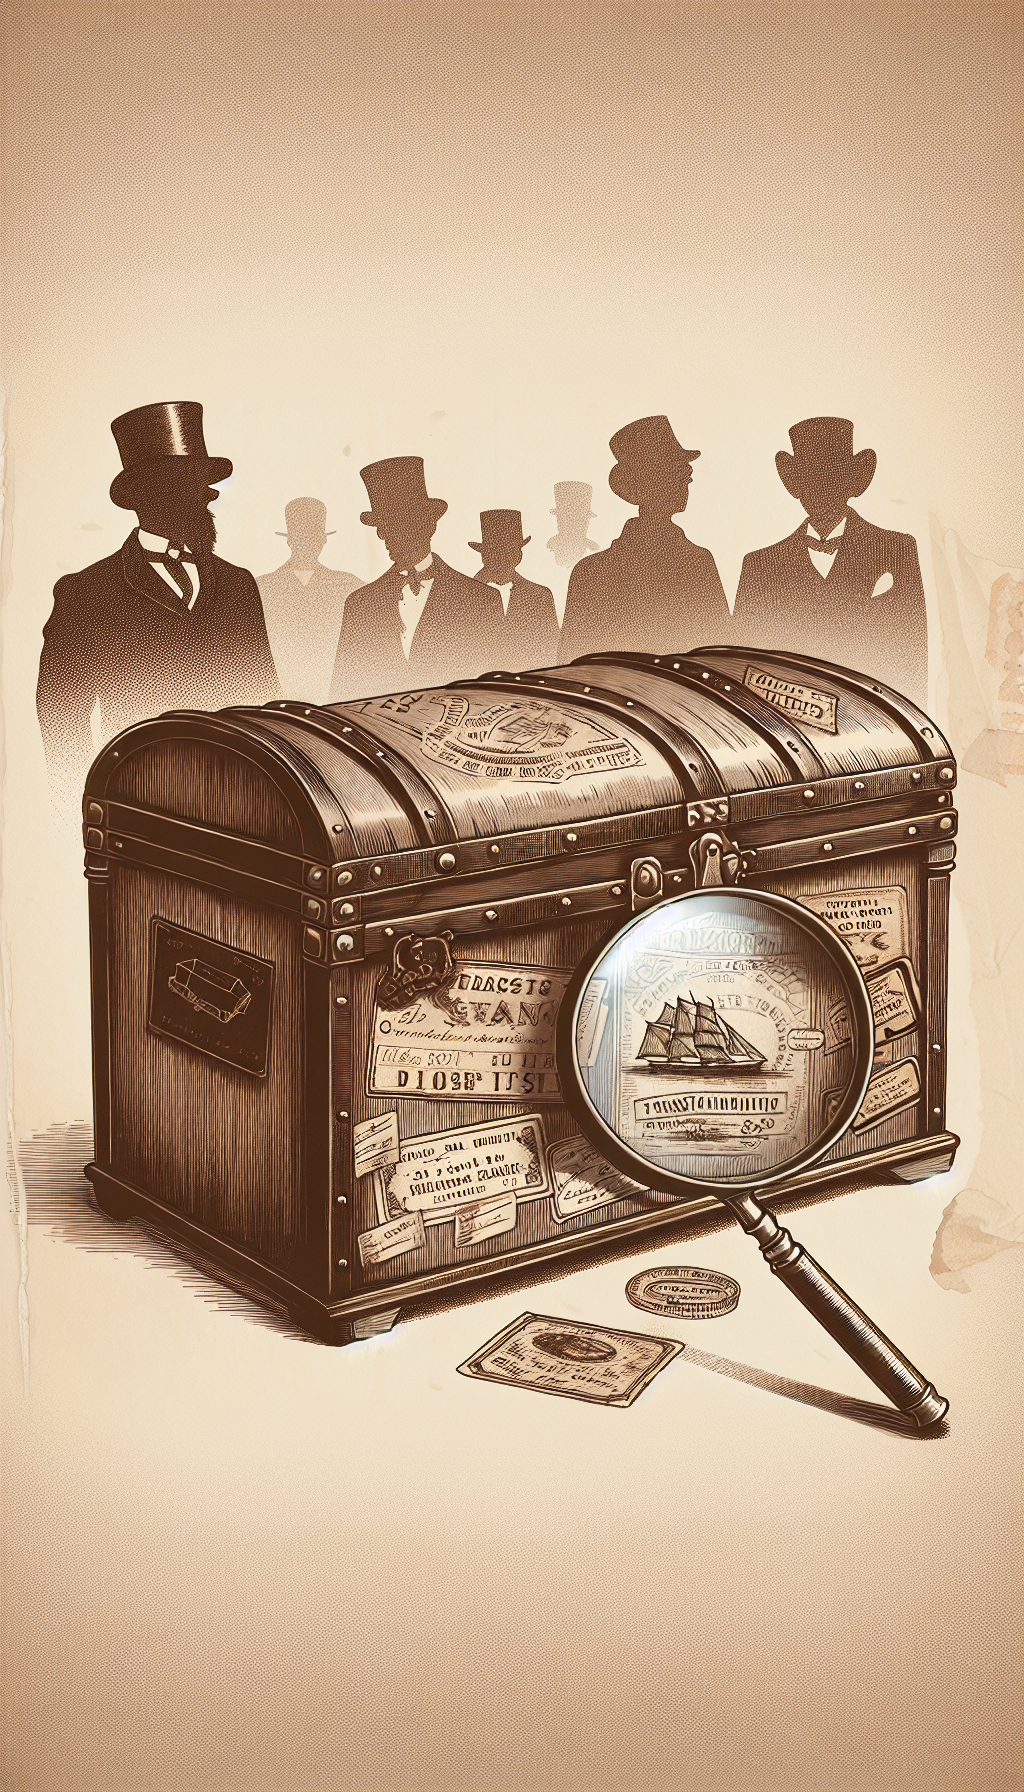 A sepia-toned illustration portrays an antique trunk, its surface etched with various vintage labels from grand hotels and transatlantic voyages. A magnifying glass looms above, revealing the craftsman's hidden signature and date, while ghostly silhouettes of its past owners whisper in the background, each overlaying an era's distinct style, intertwining the trunk's rich history with its timeless value.